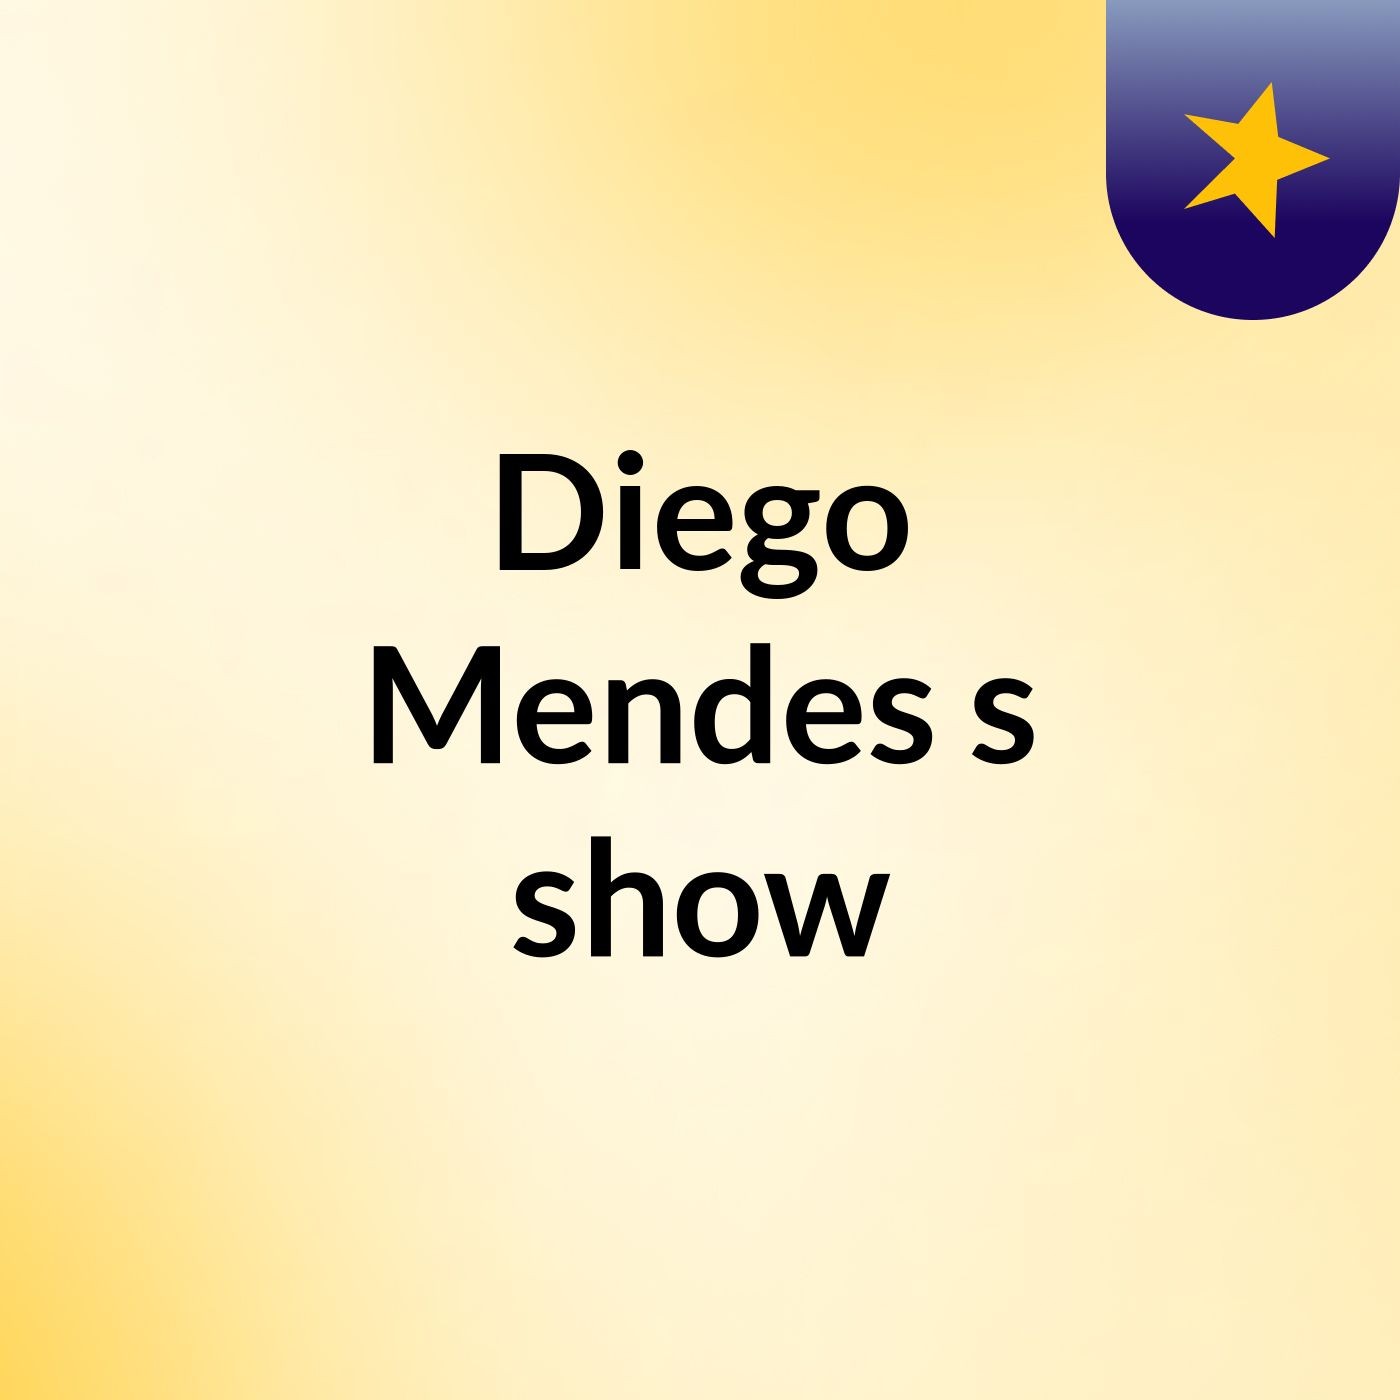 Diego Mendes's show